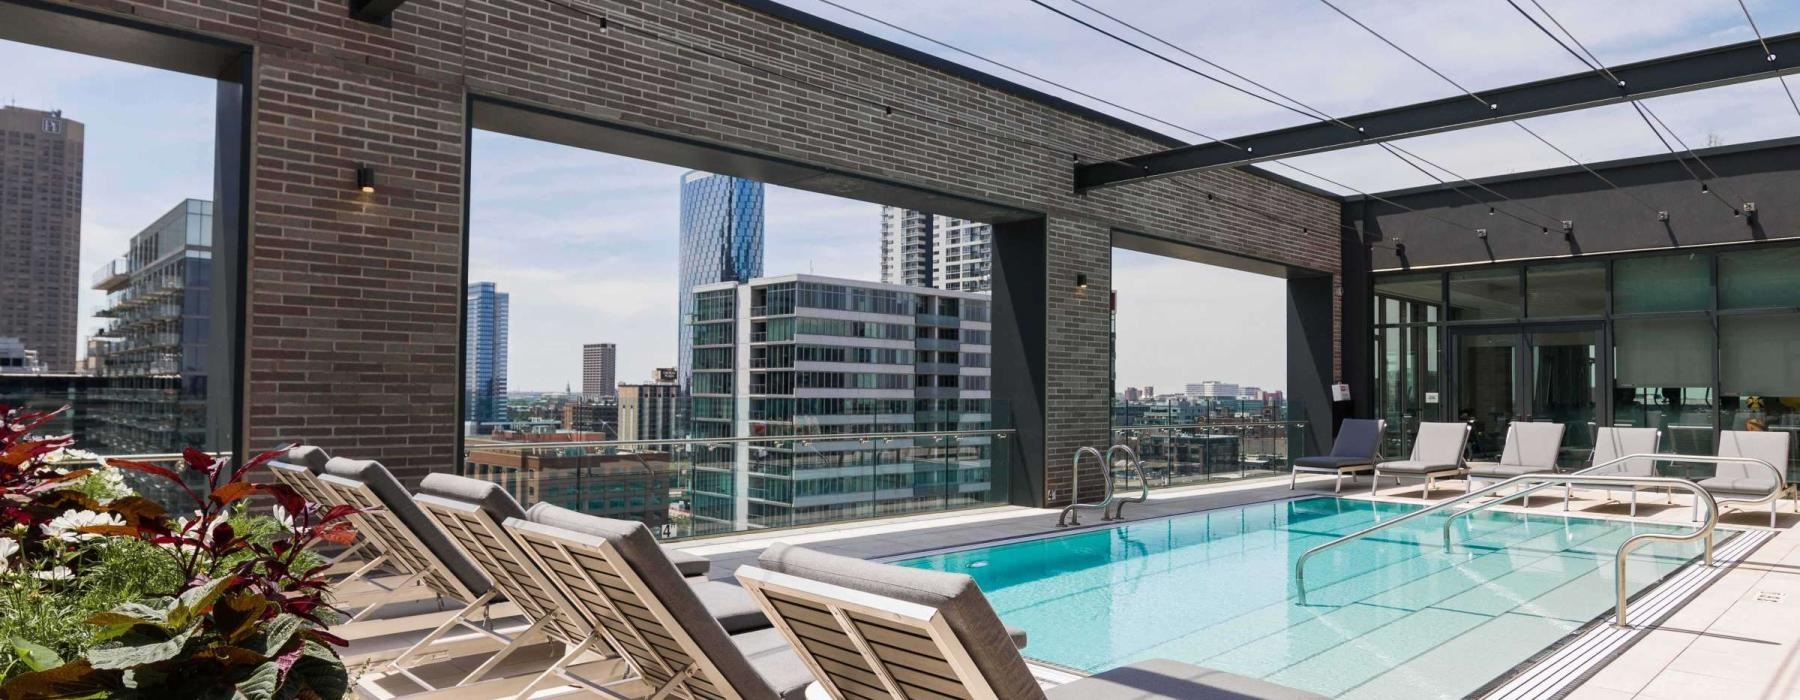 a swimming pool with a view of a city